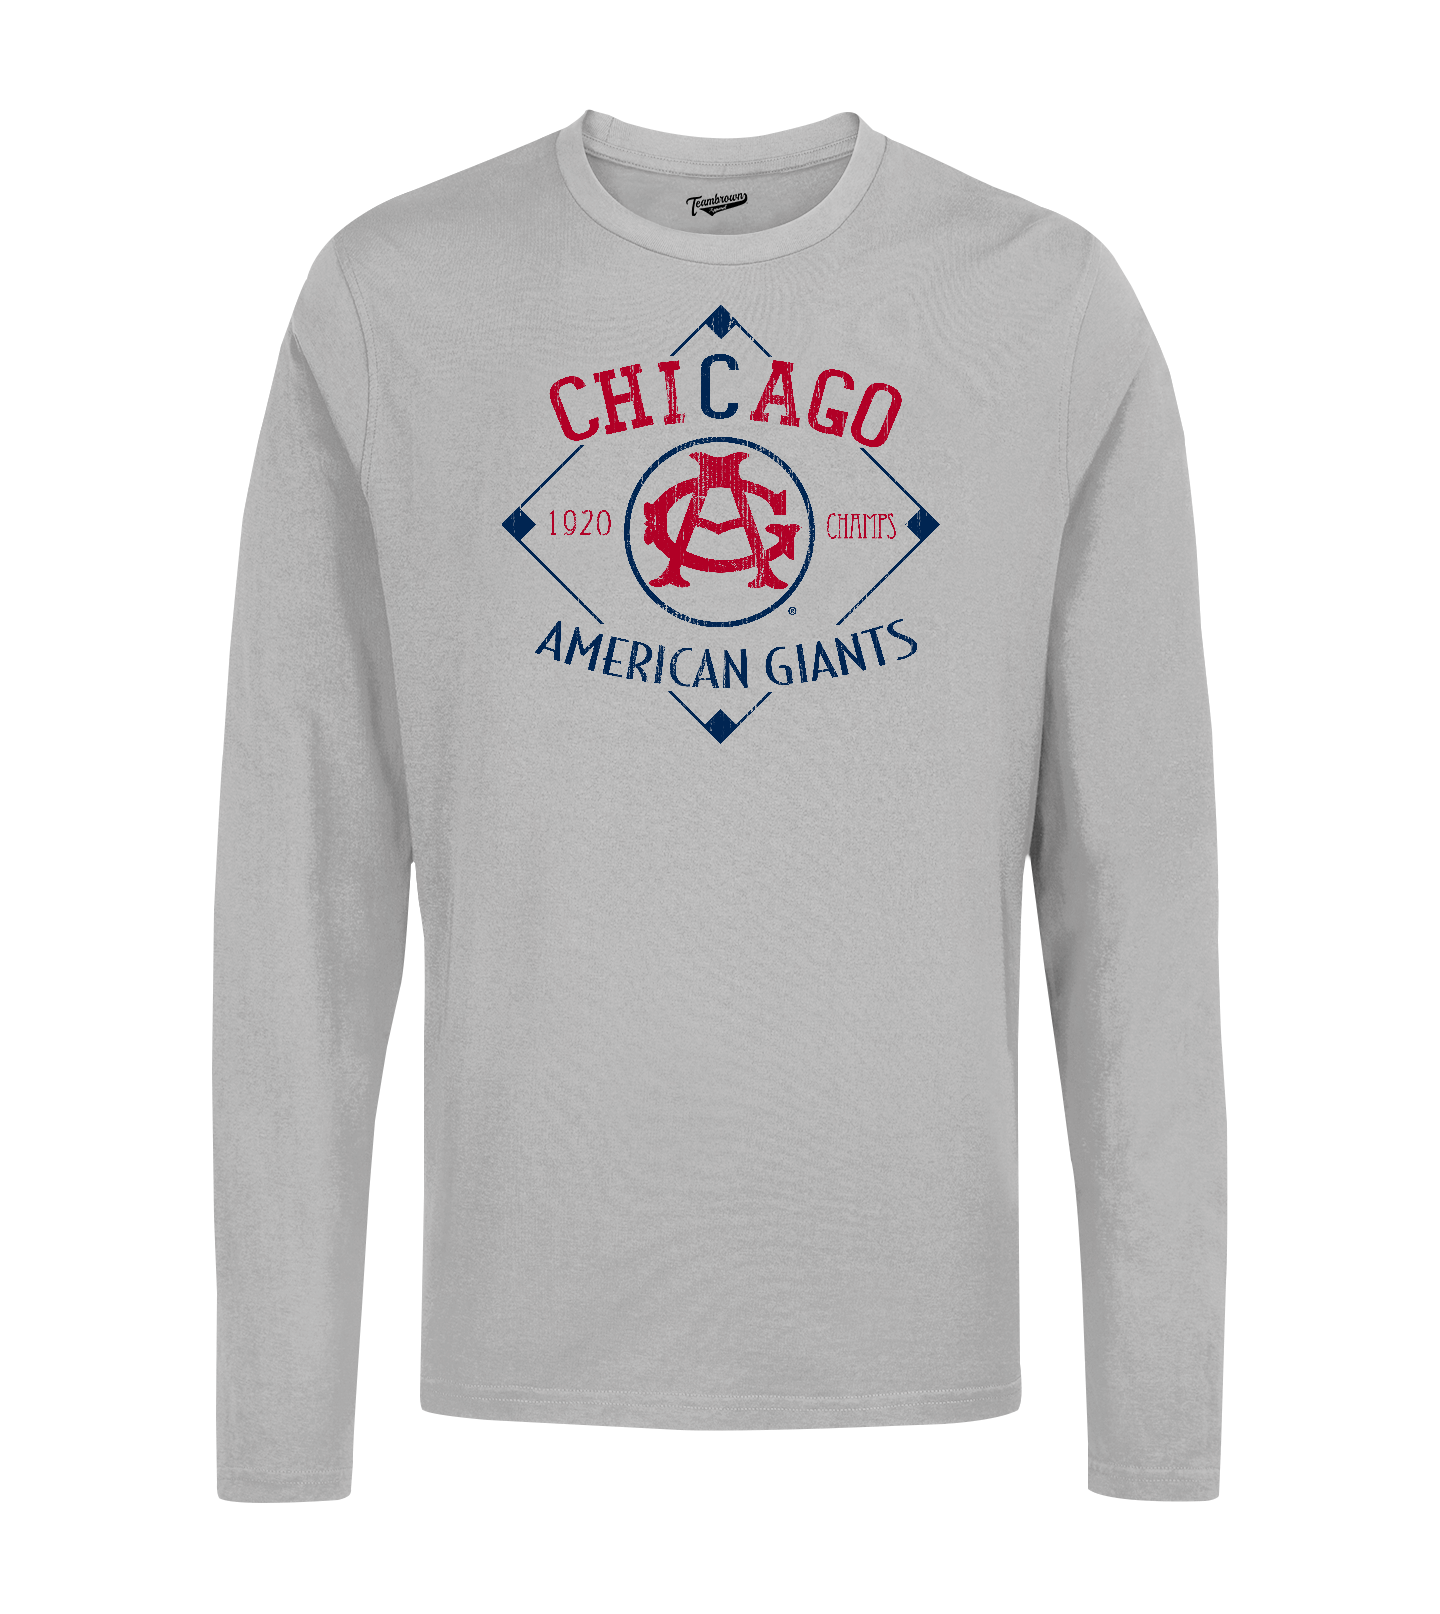 1920 Champions - Chicago American Giants - Unisex Long Sleeve Crew T-Shirt | Officially Licensed - NLBM